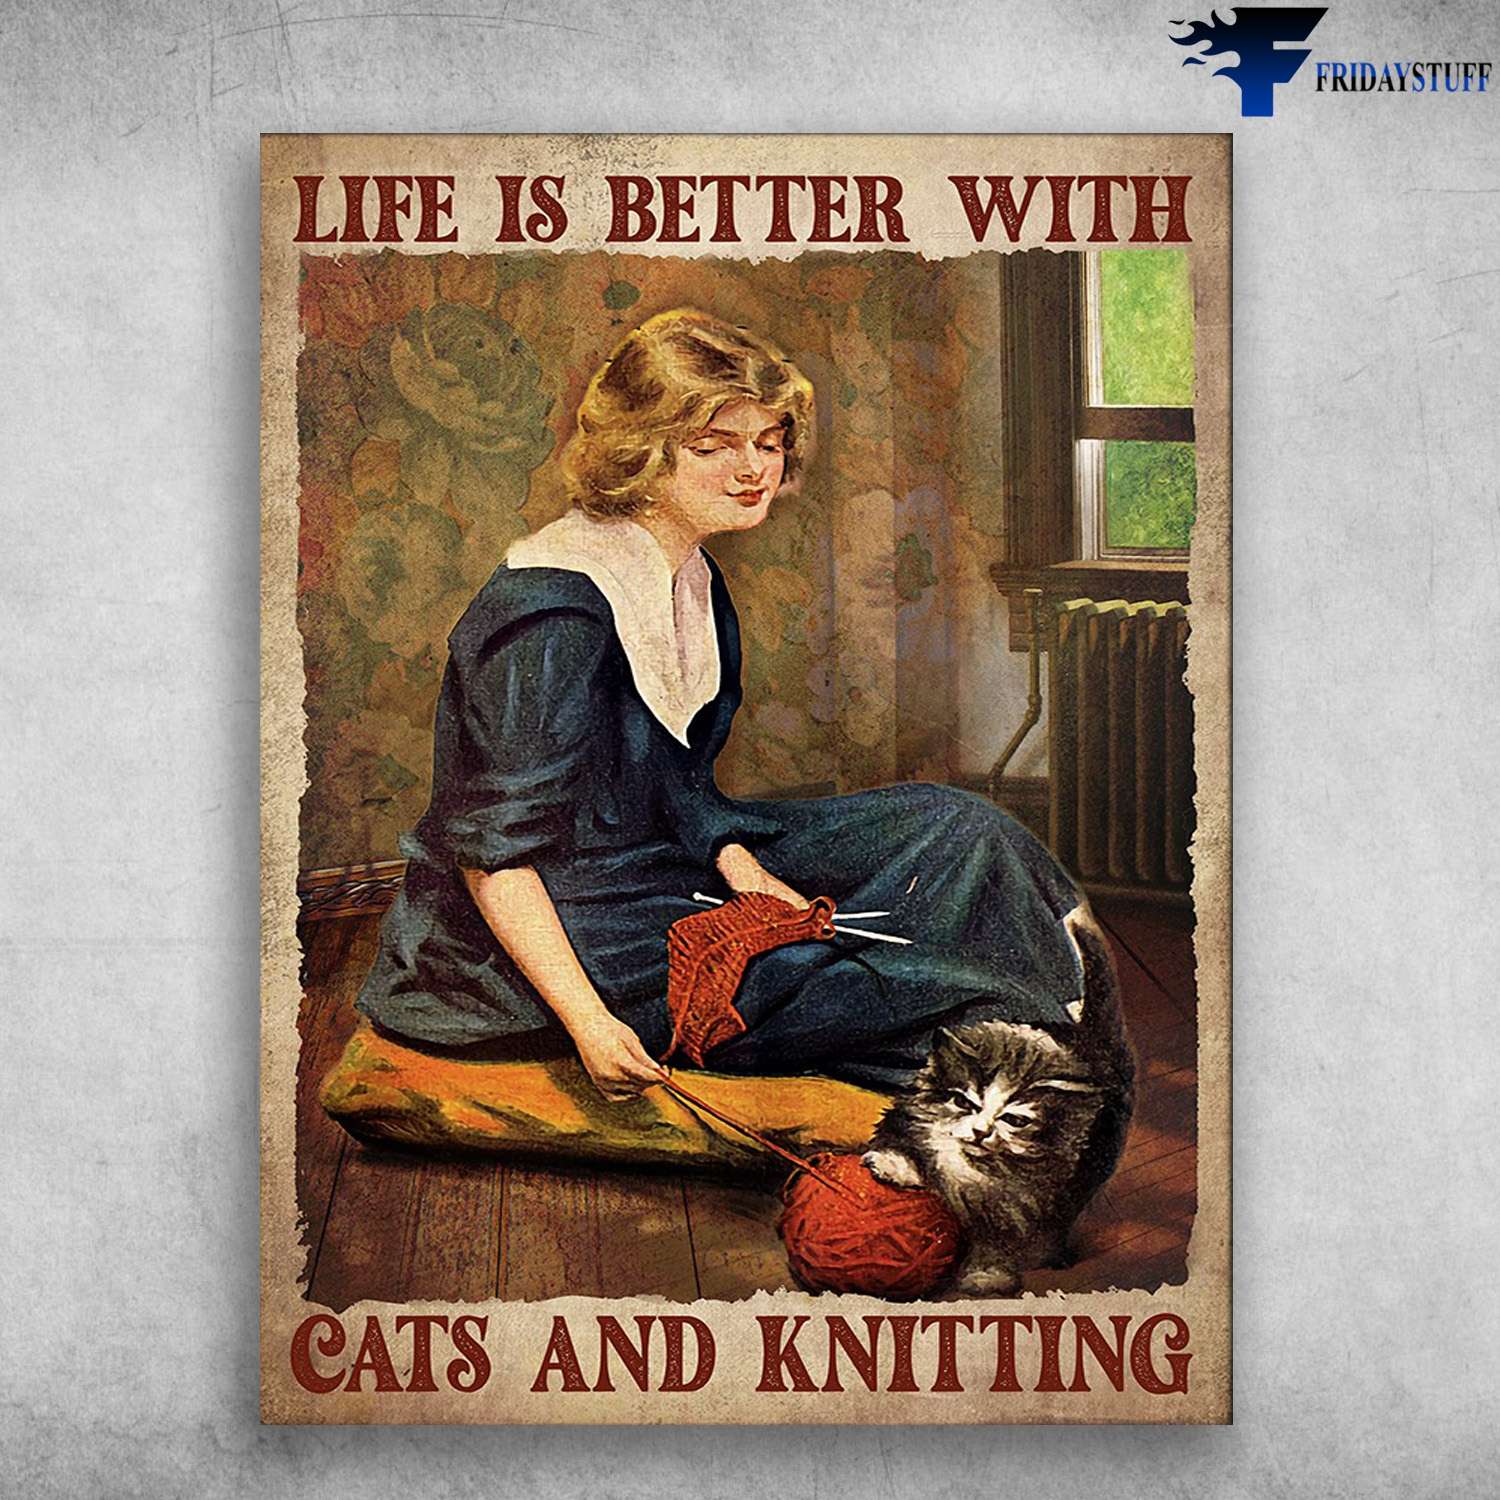 Girl Knitting, Cat Lover - Life Is Better With, Cats And Knitting